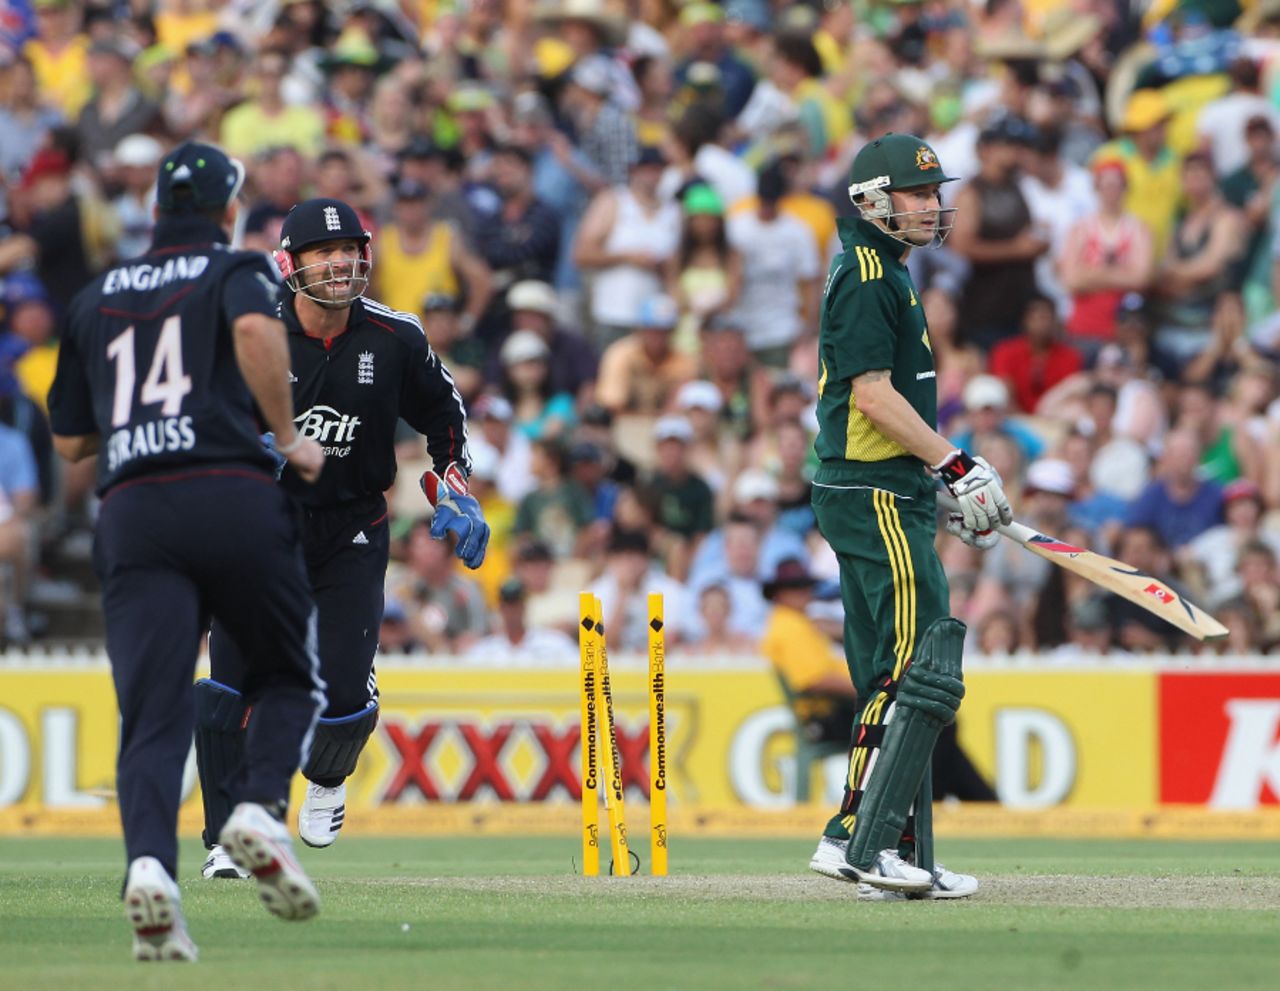 Michael Clarke made just 15 before he was bowled by Paul Collingwood, Australia v England, 4th ODI, Adelaide, January 26, 2011